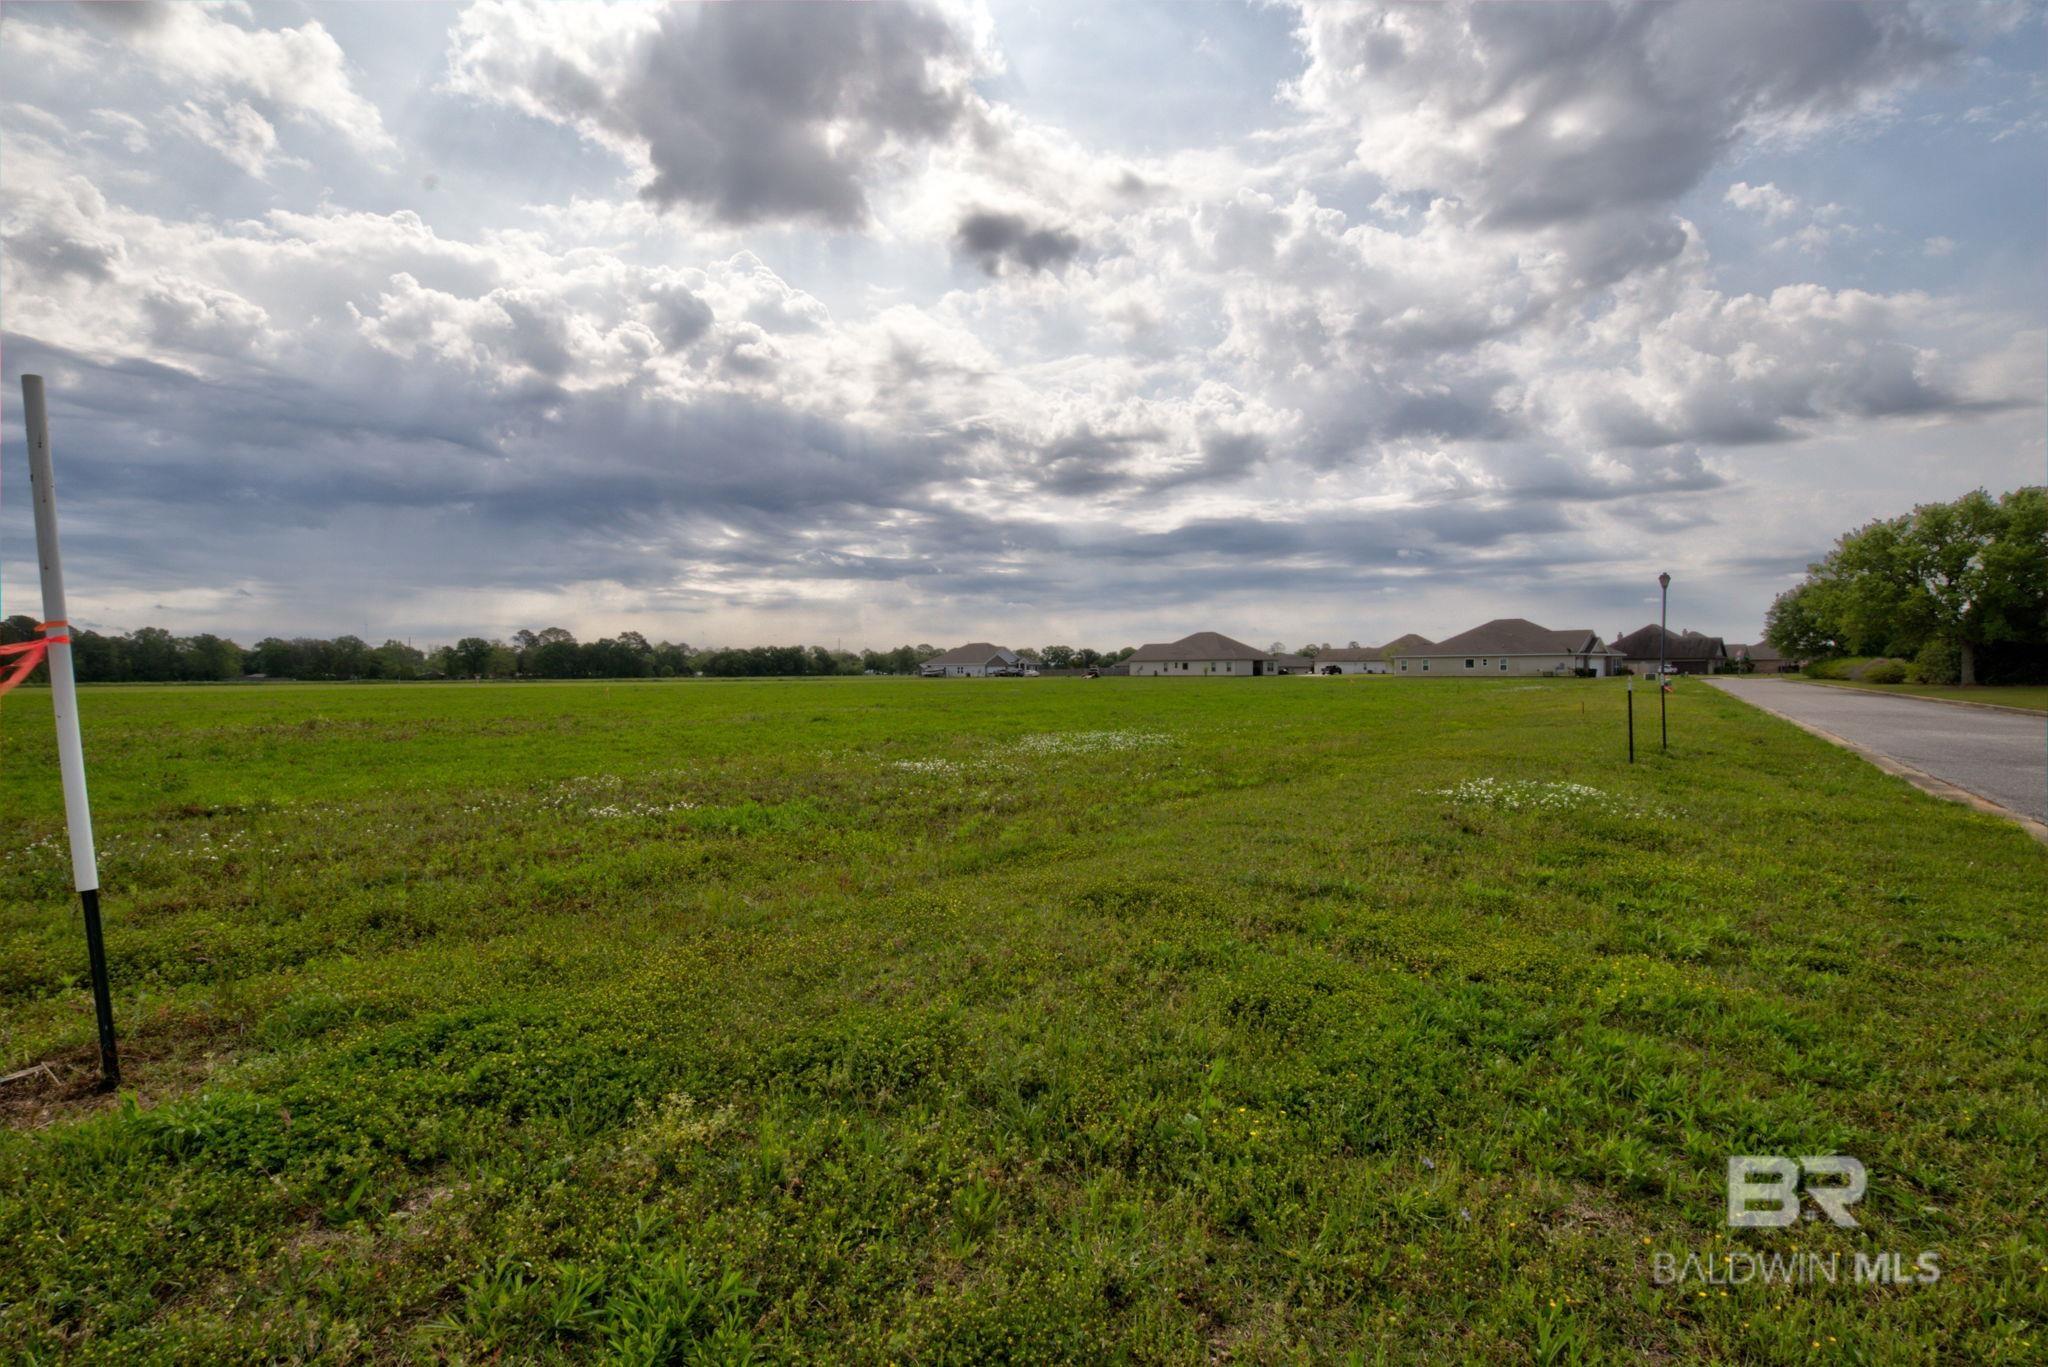 With its spacious three-acre size and proximity to Valamour subdivision without the constraints of an HOA, this 3 acres offers a perfect canvas for your new home. With minimal restrictions in place, you'll have the freedom to create your ideal living space. Let's discuss how we can turn this promising parcel into the foundation for your dream home!